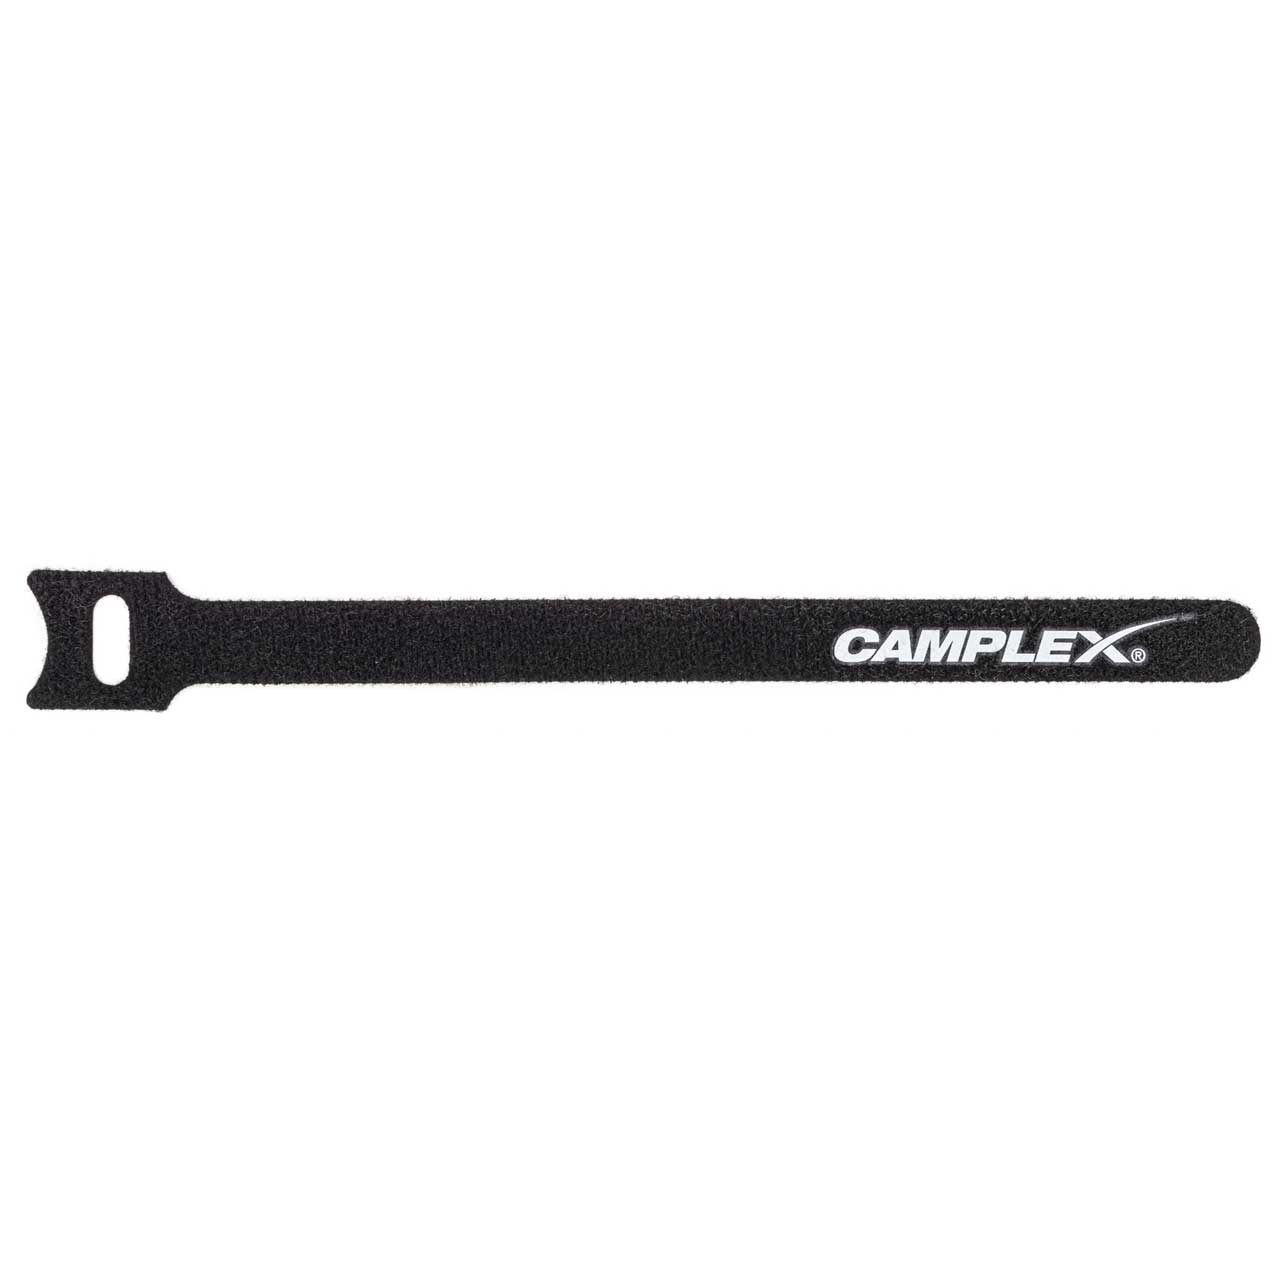 Camplex Hook and Loop Cable Wrap 12mm x 180mm Black with White Logo - 250 Pack CMX-HKNLP-250PK